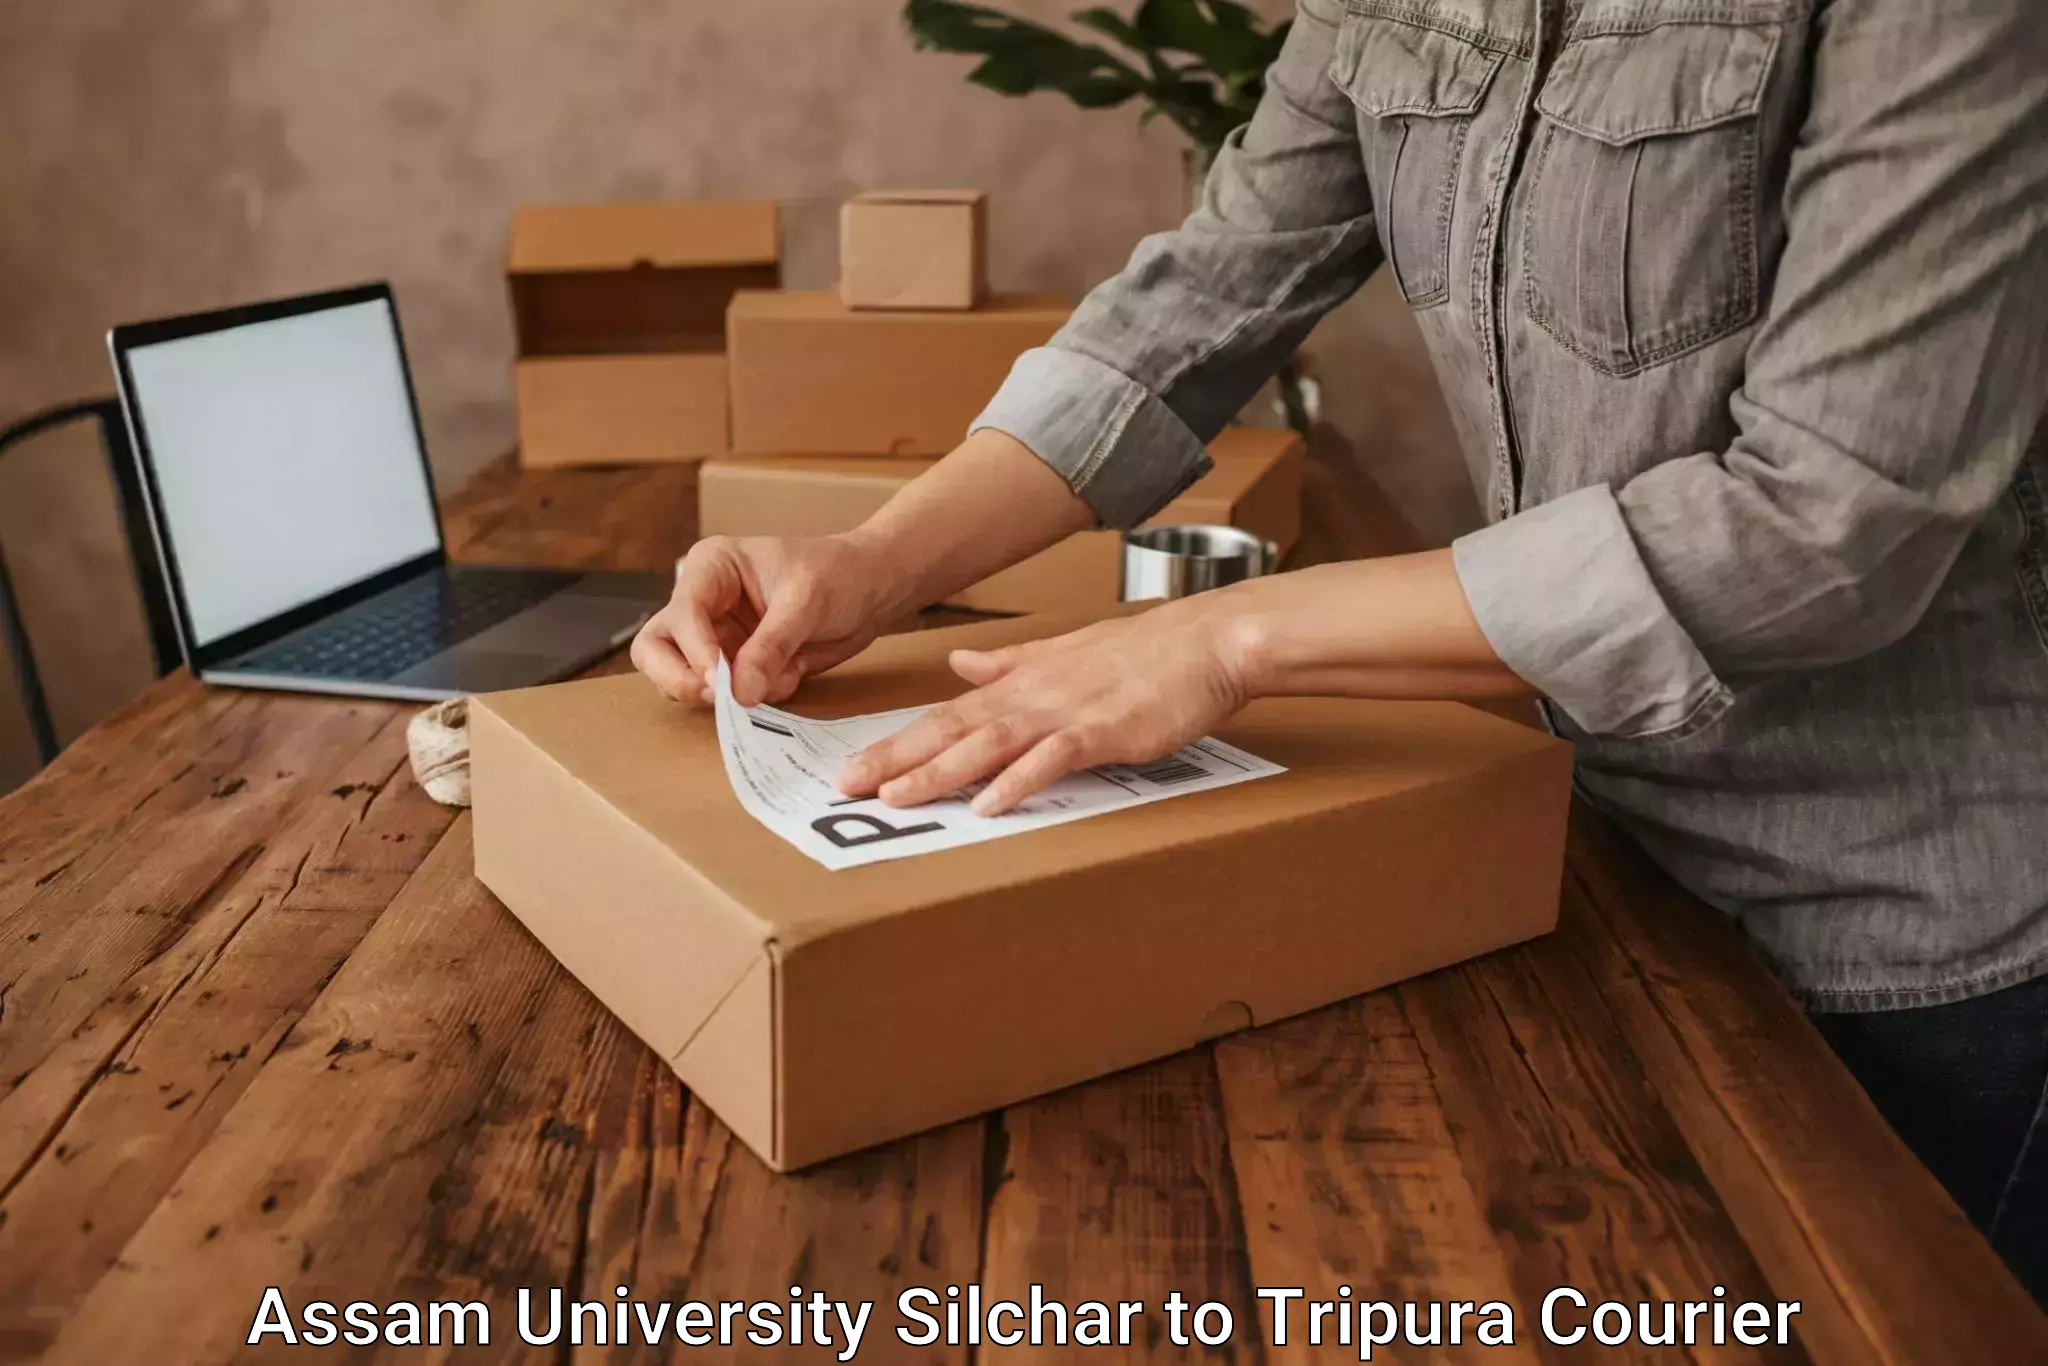 Sustainable delivery practices Assam University Silchar to Sonamura